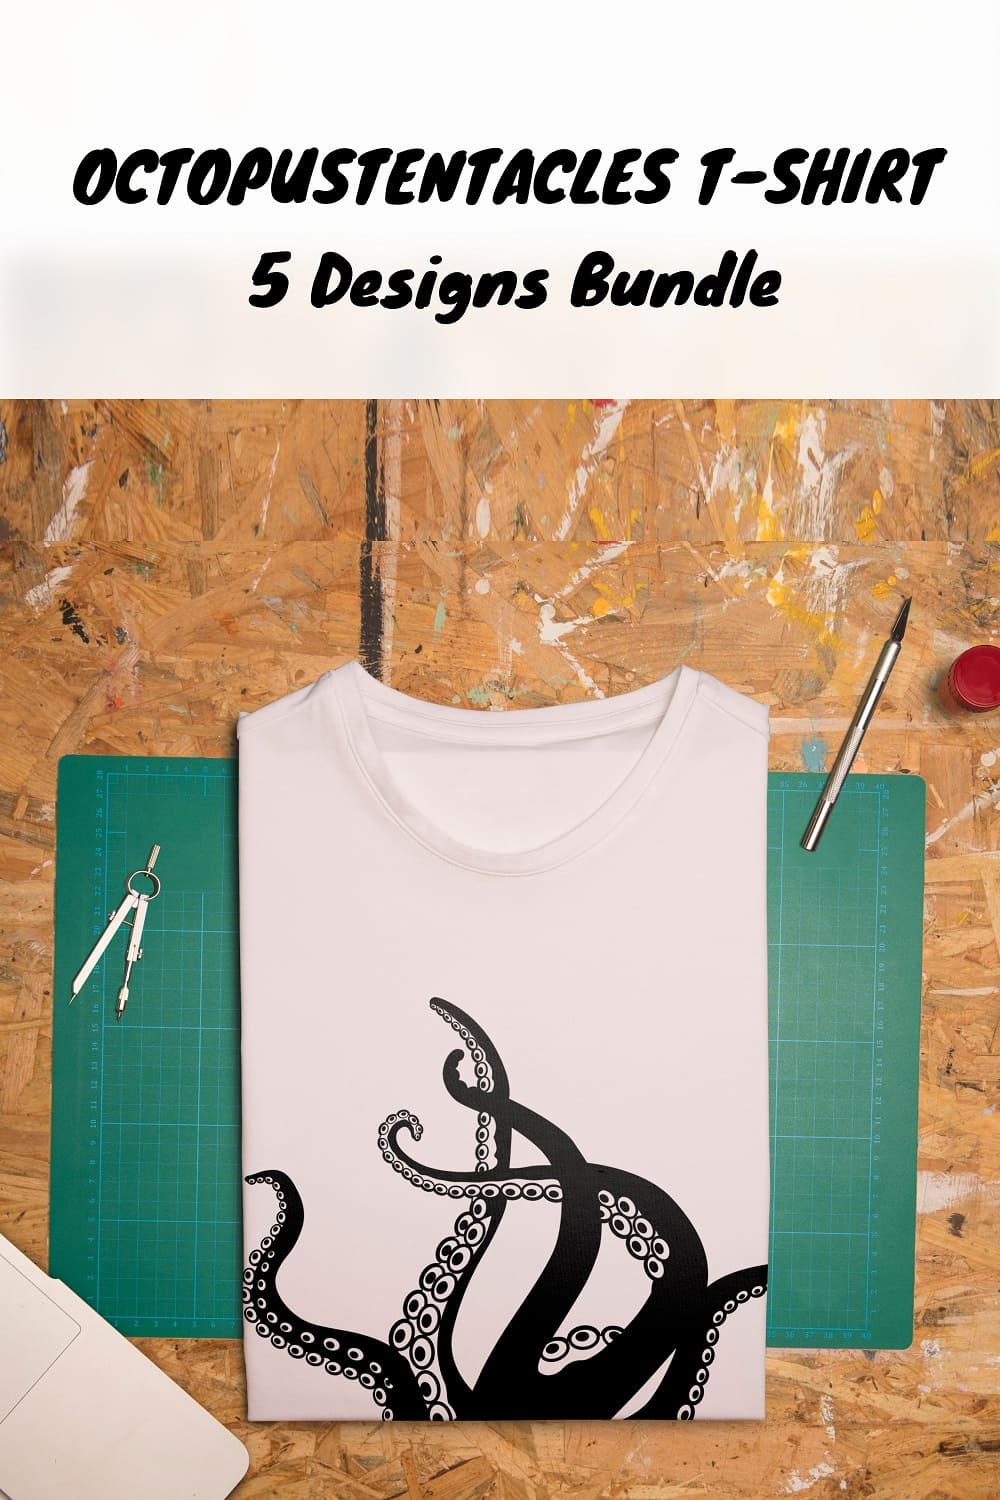 Black and white t-shirts with octopus tentacles in the picture for Pinterest.